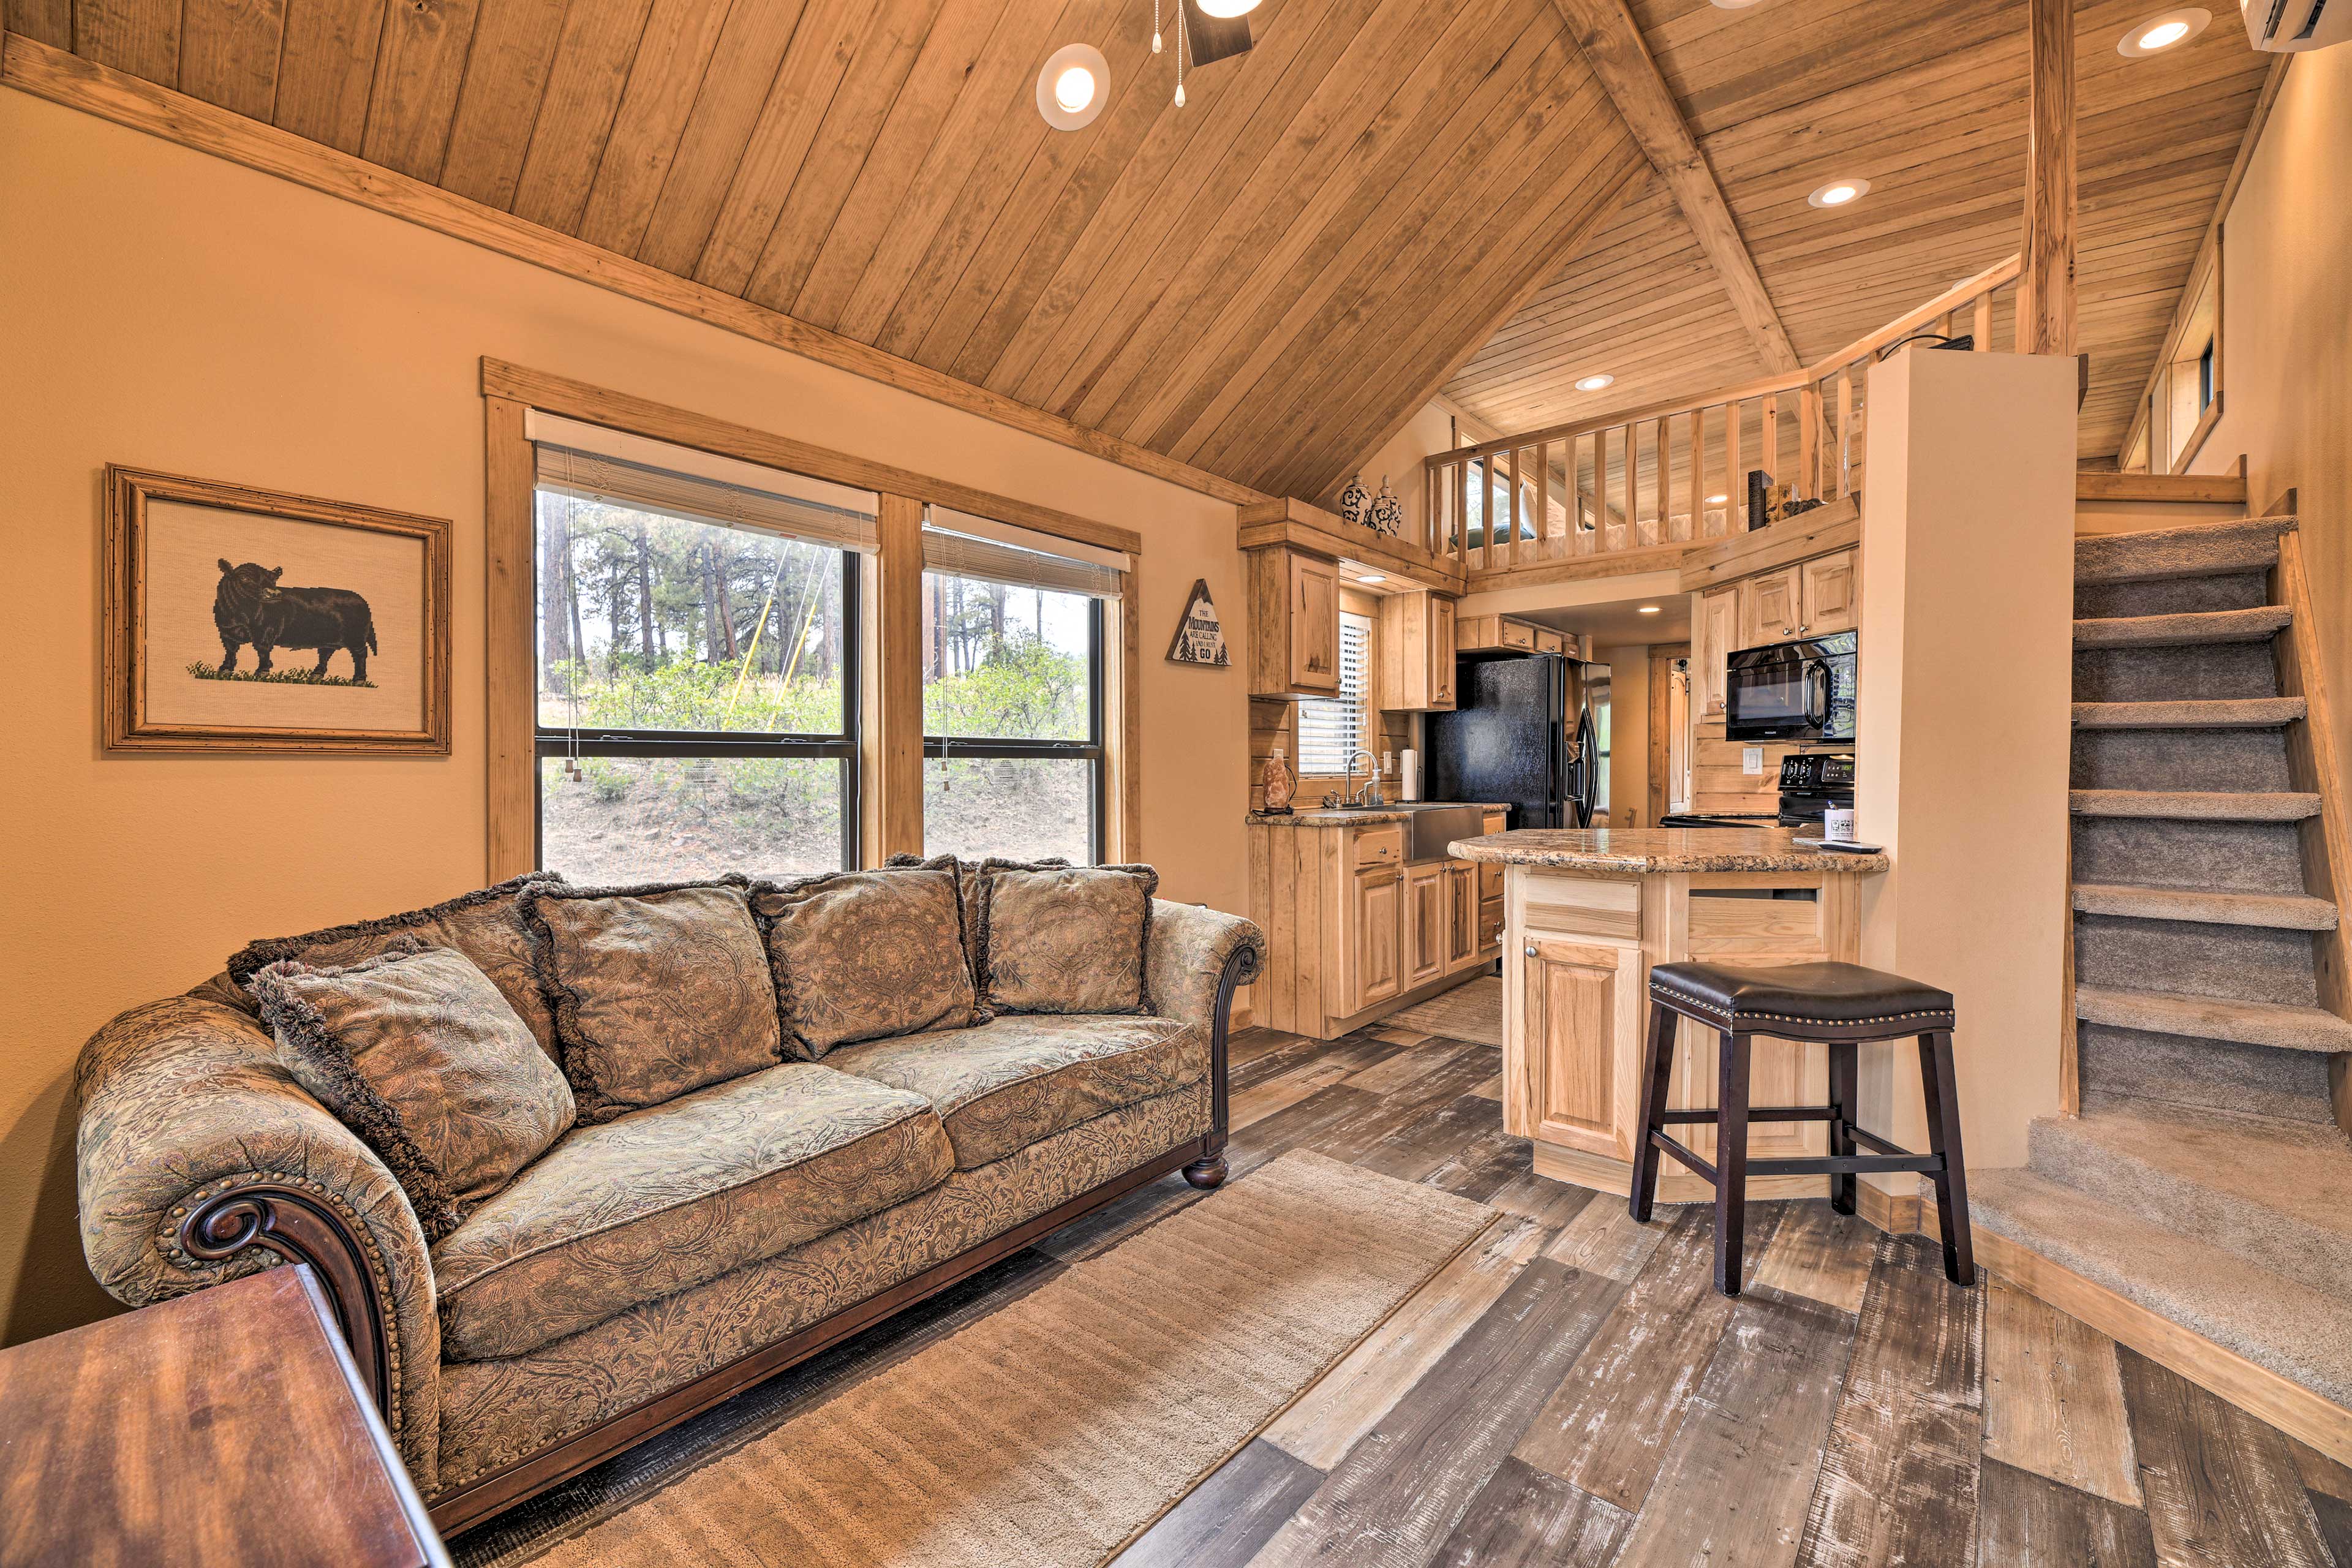 This 1-bedroom, 1-bath vacation rental is located in Pagosa Springs!